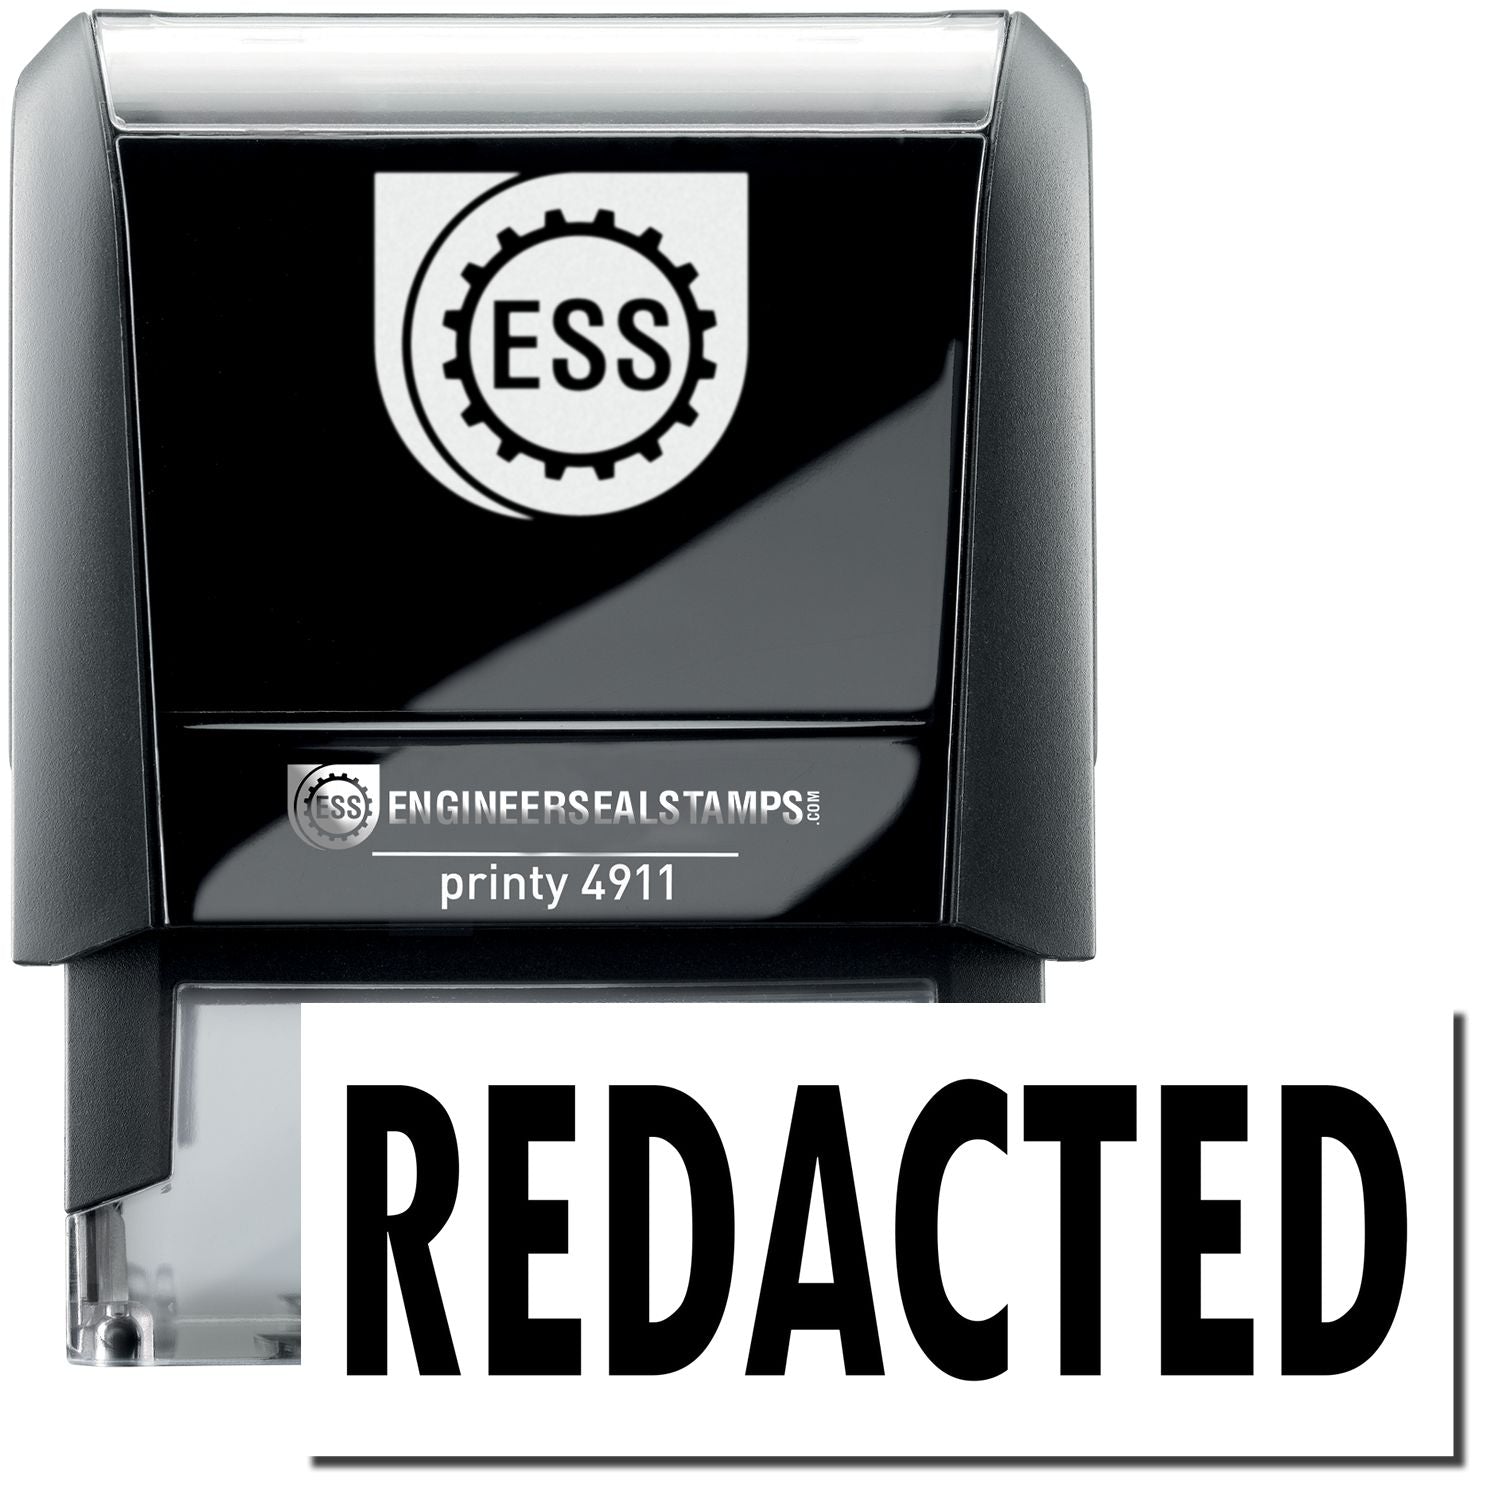 A self-inking stamp with a stamped image showing how the text "REDACTED" is displayed after stamping.